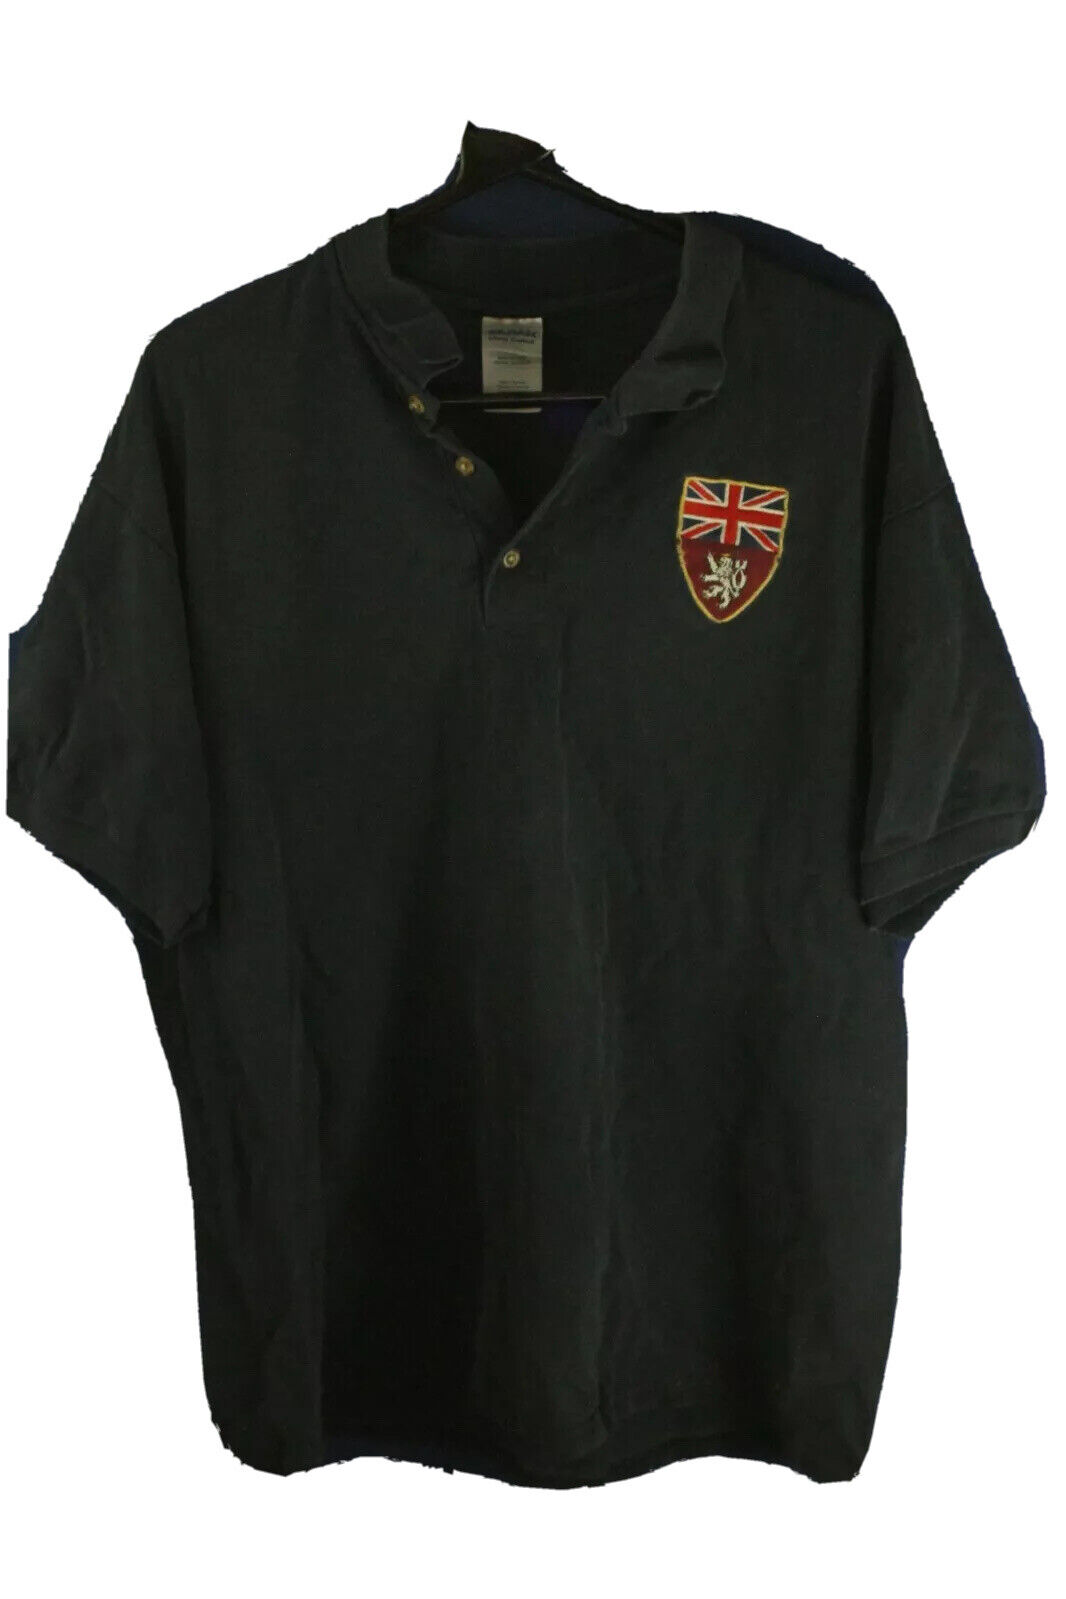 BRITISH ARMY POLO SHIRT XL HQ MIDDLE EAST LAND FORCES   